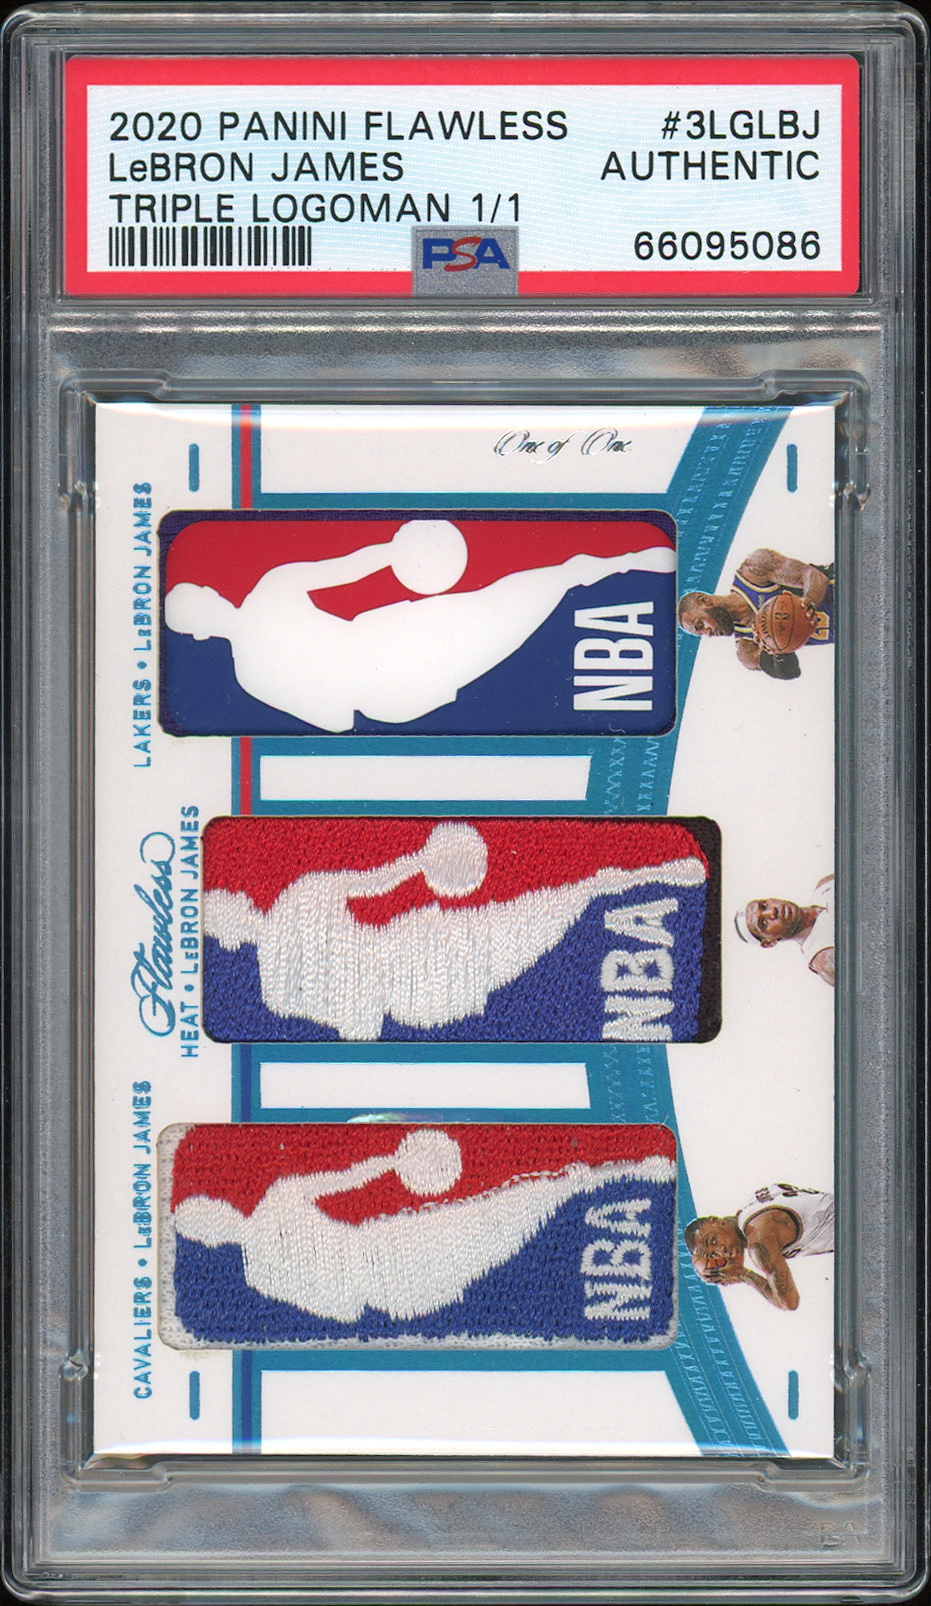 'Holy Grail' LeBron James card expected to top $6 million at auction